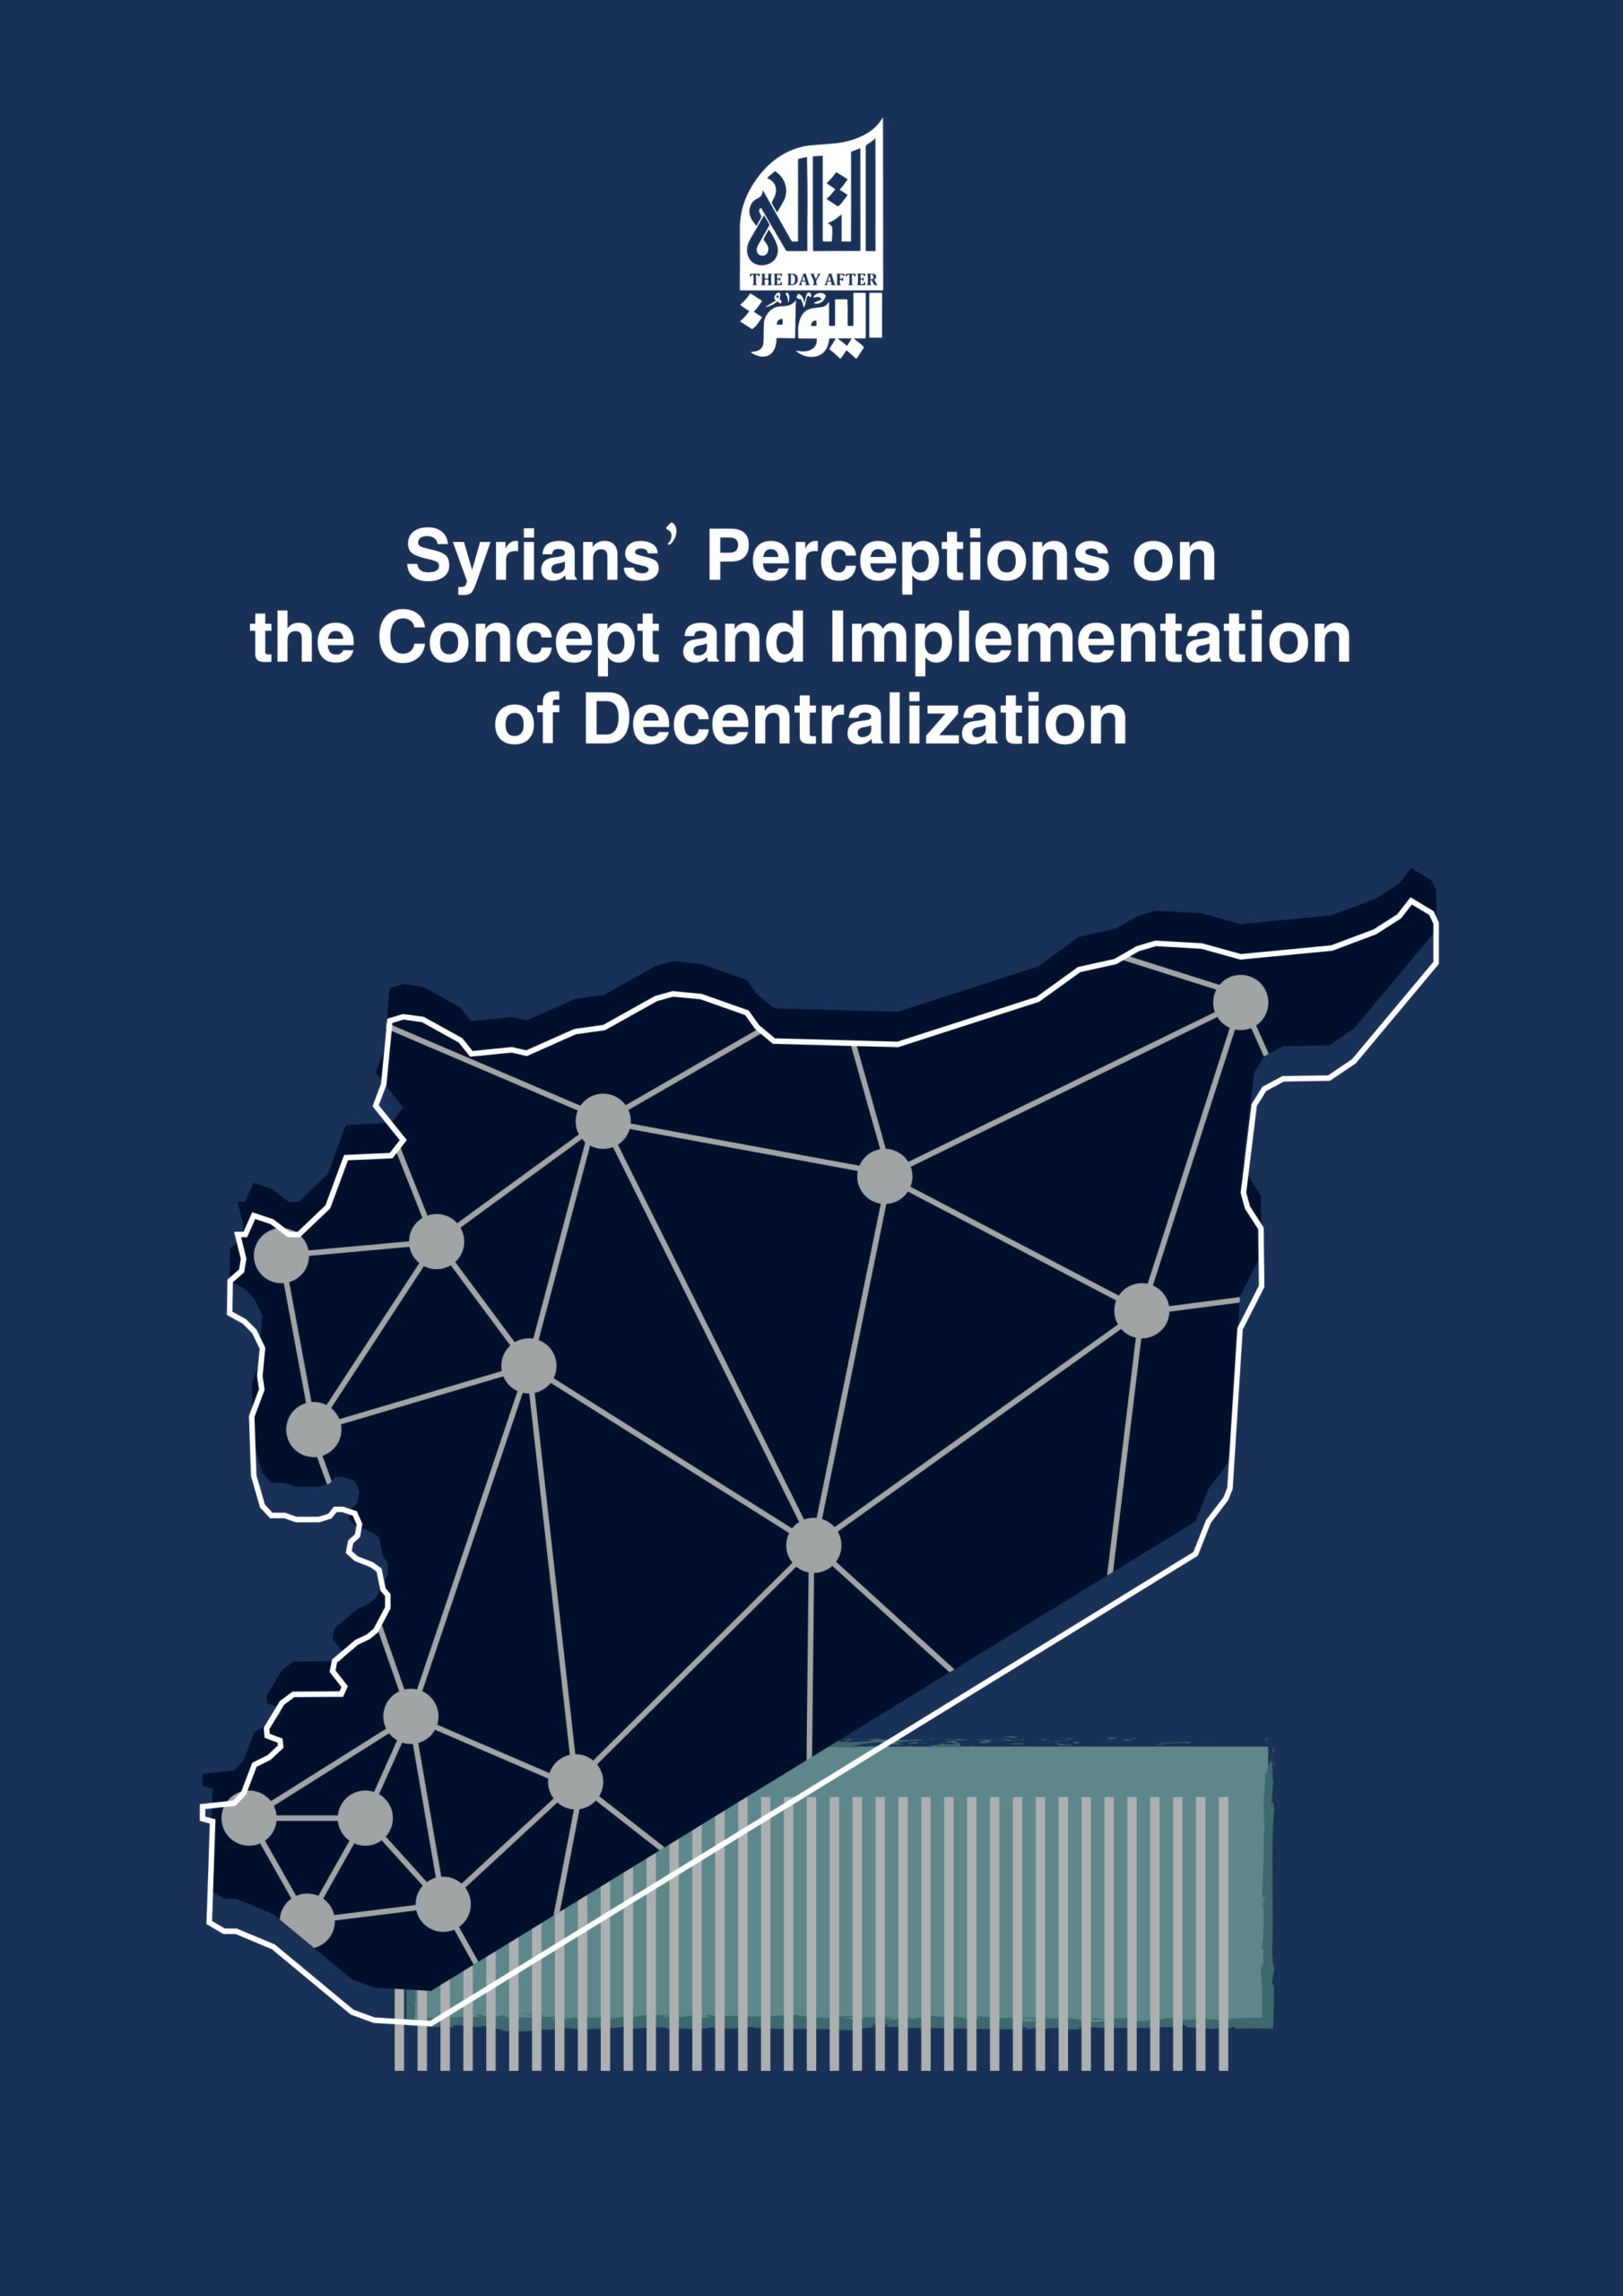 Syrians’ Perceptions on the Concept and Implementation of Decentralization